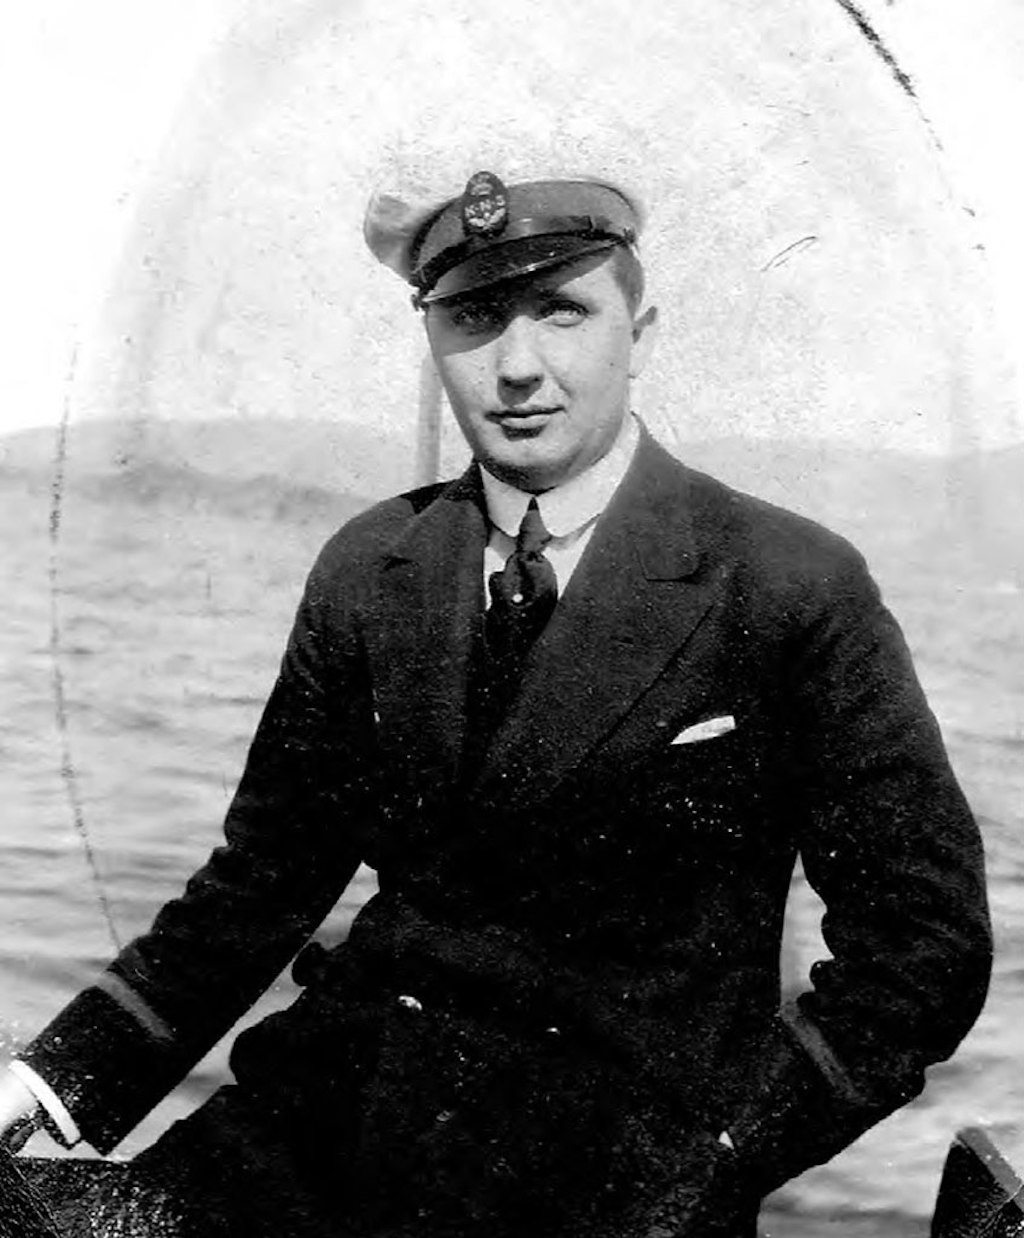 A person in a jacket, shirt, tie and sailors cap with choppy water in the background